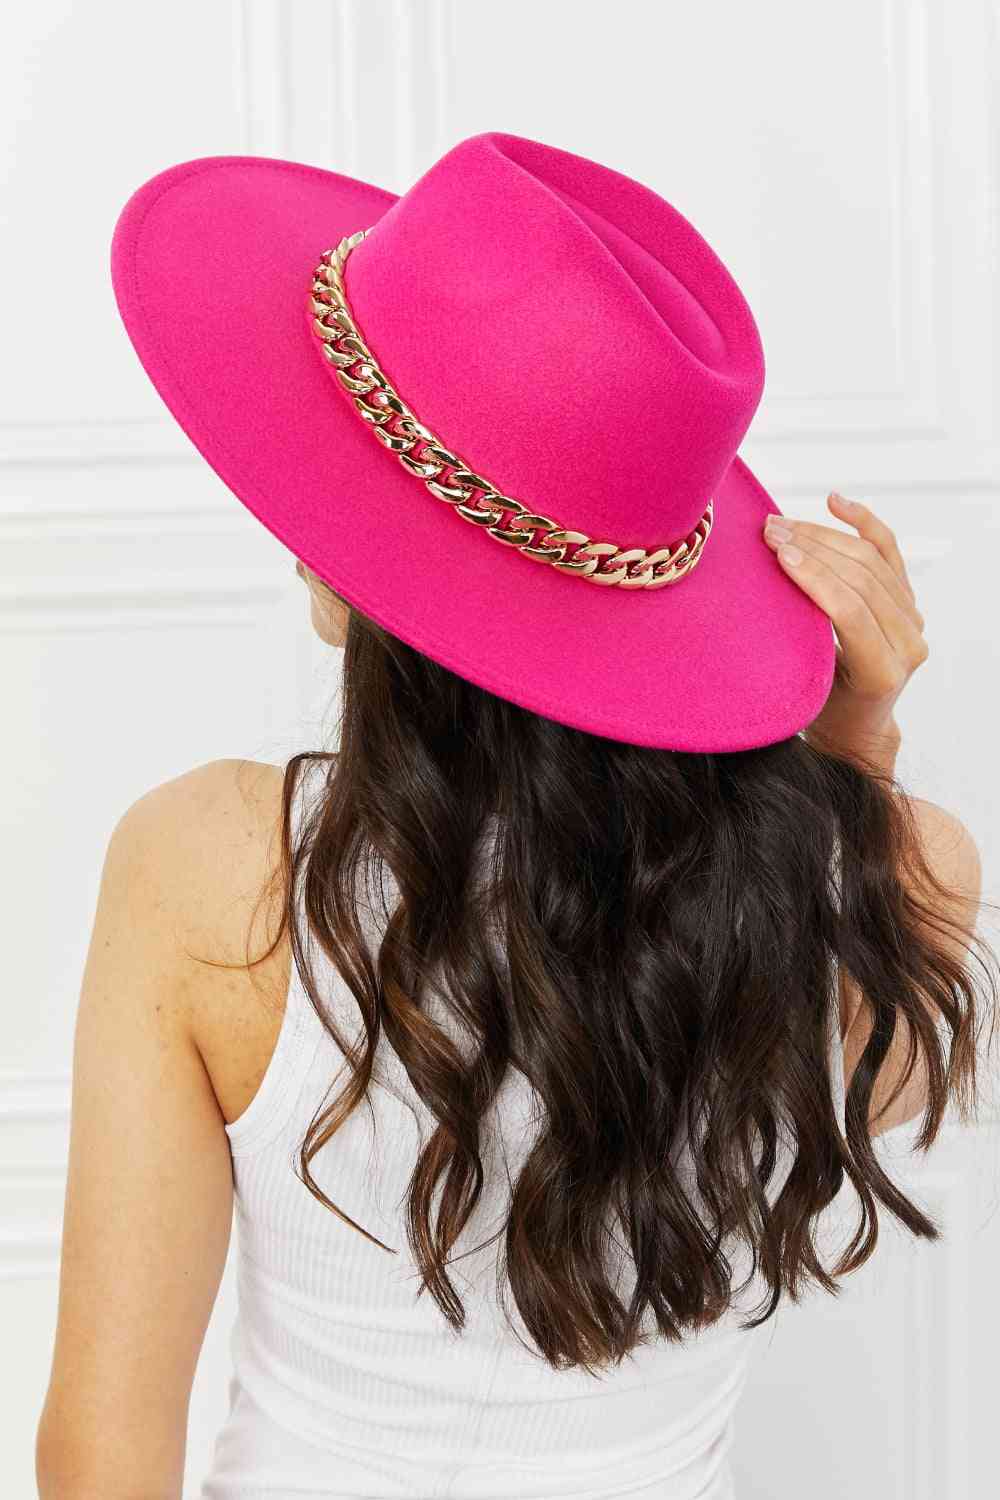 Fame Keep Your Promise Fedora Hat in Pink Hot Pink One Size